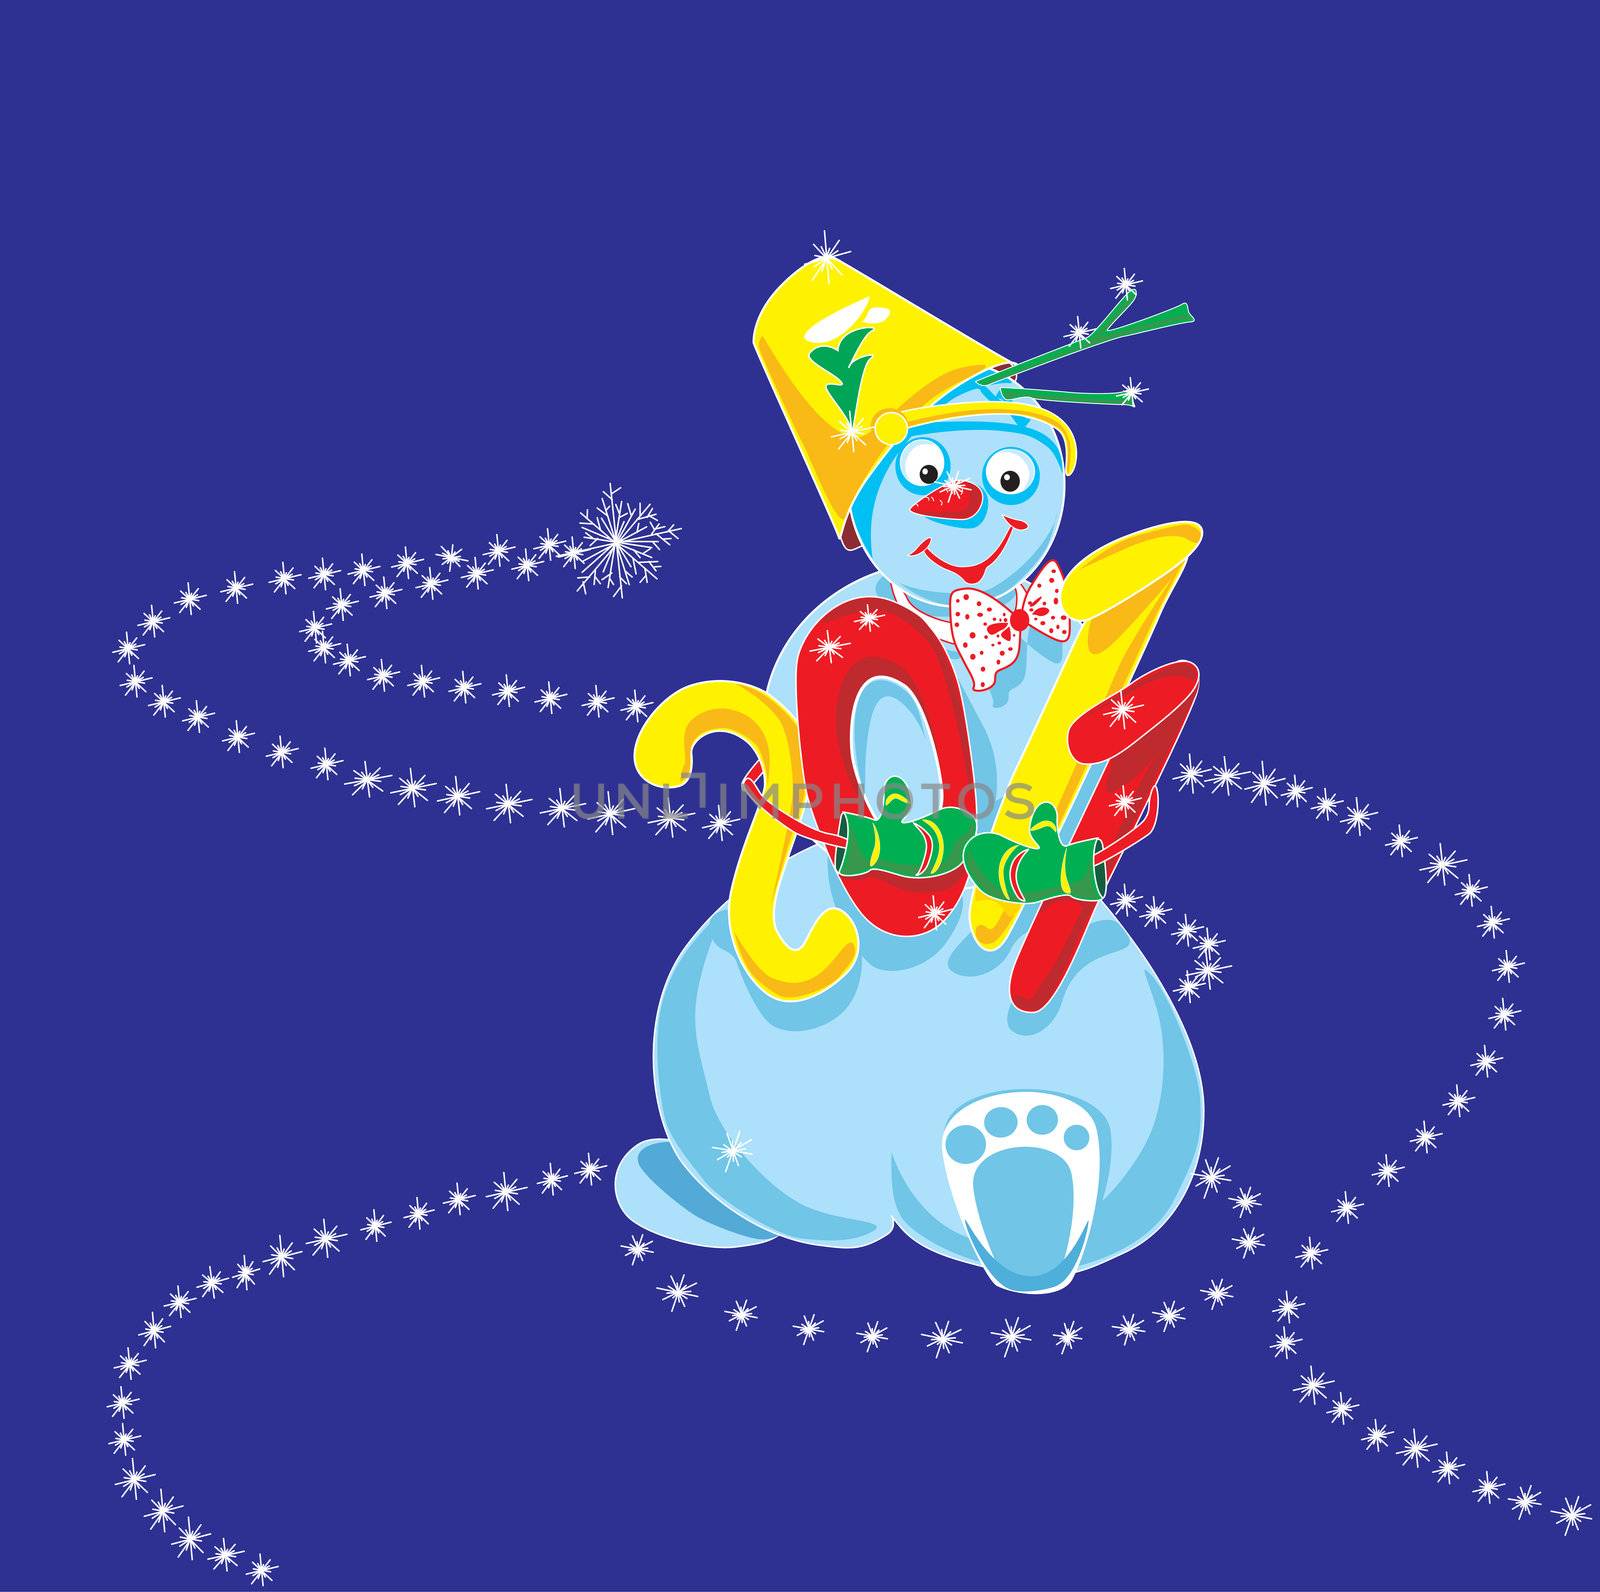 In 2011, a snowman is, the new year, Merry Christmas, a snowman is, knitted gloves, a bucket on his head, is 2011, begins in 2011, the path of snowflakes, beautiful ribbon, a yellow bucket, red 0 and 1, green mittens, a cheerful snowman, marching along the path, tsyfry in hand colored 2011